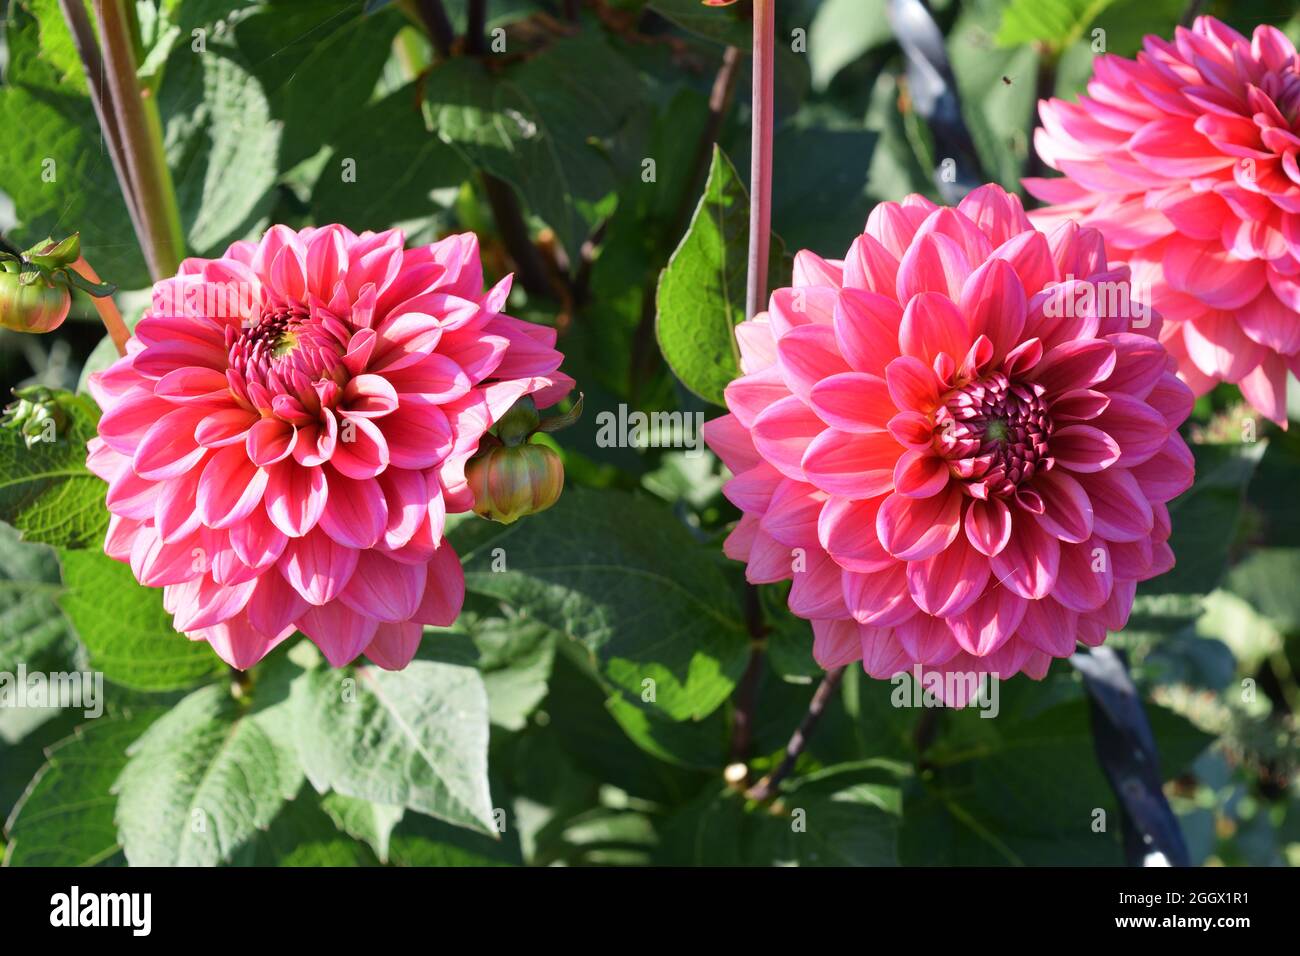 Dahlia. Type Salmon Runner two double pink flowers in natural surroundings Stock Photo